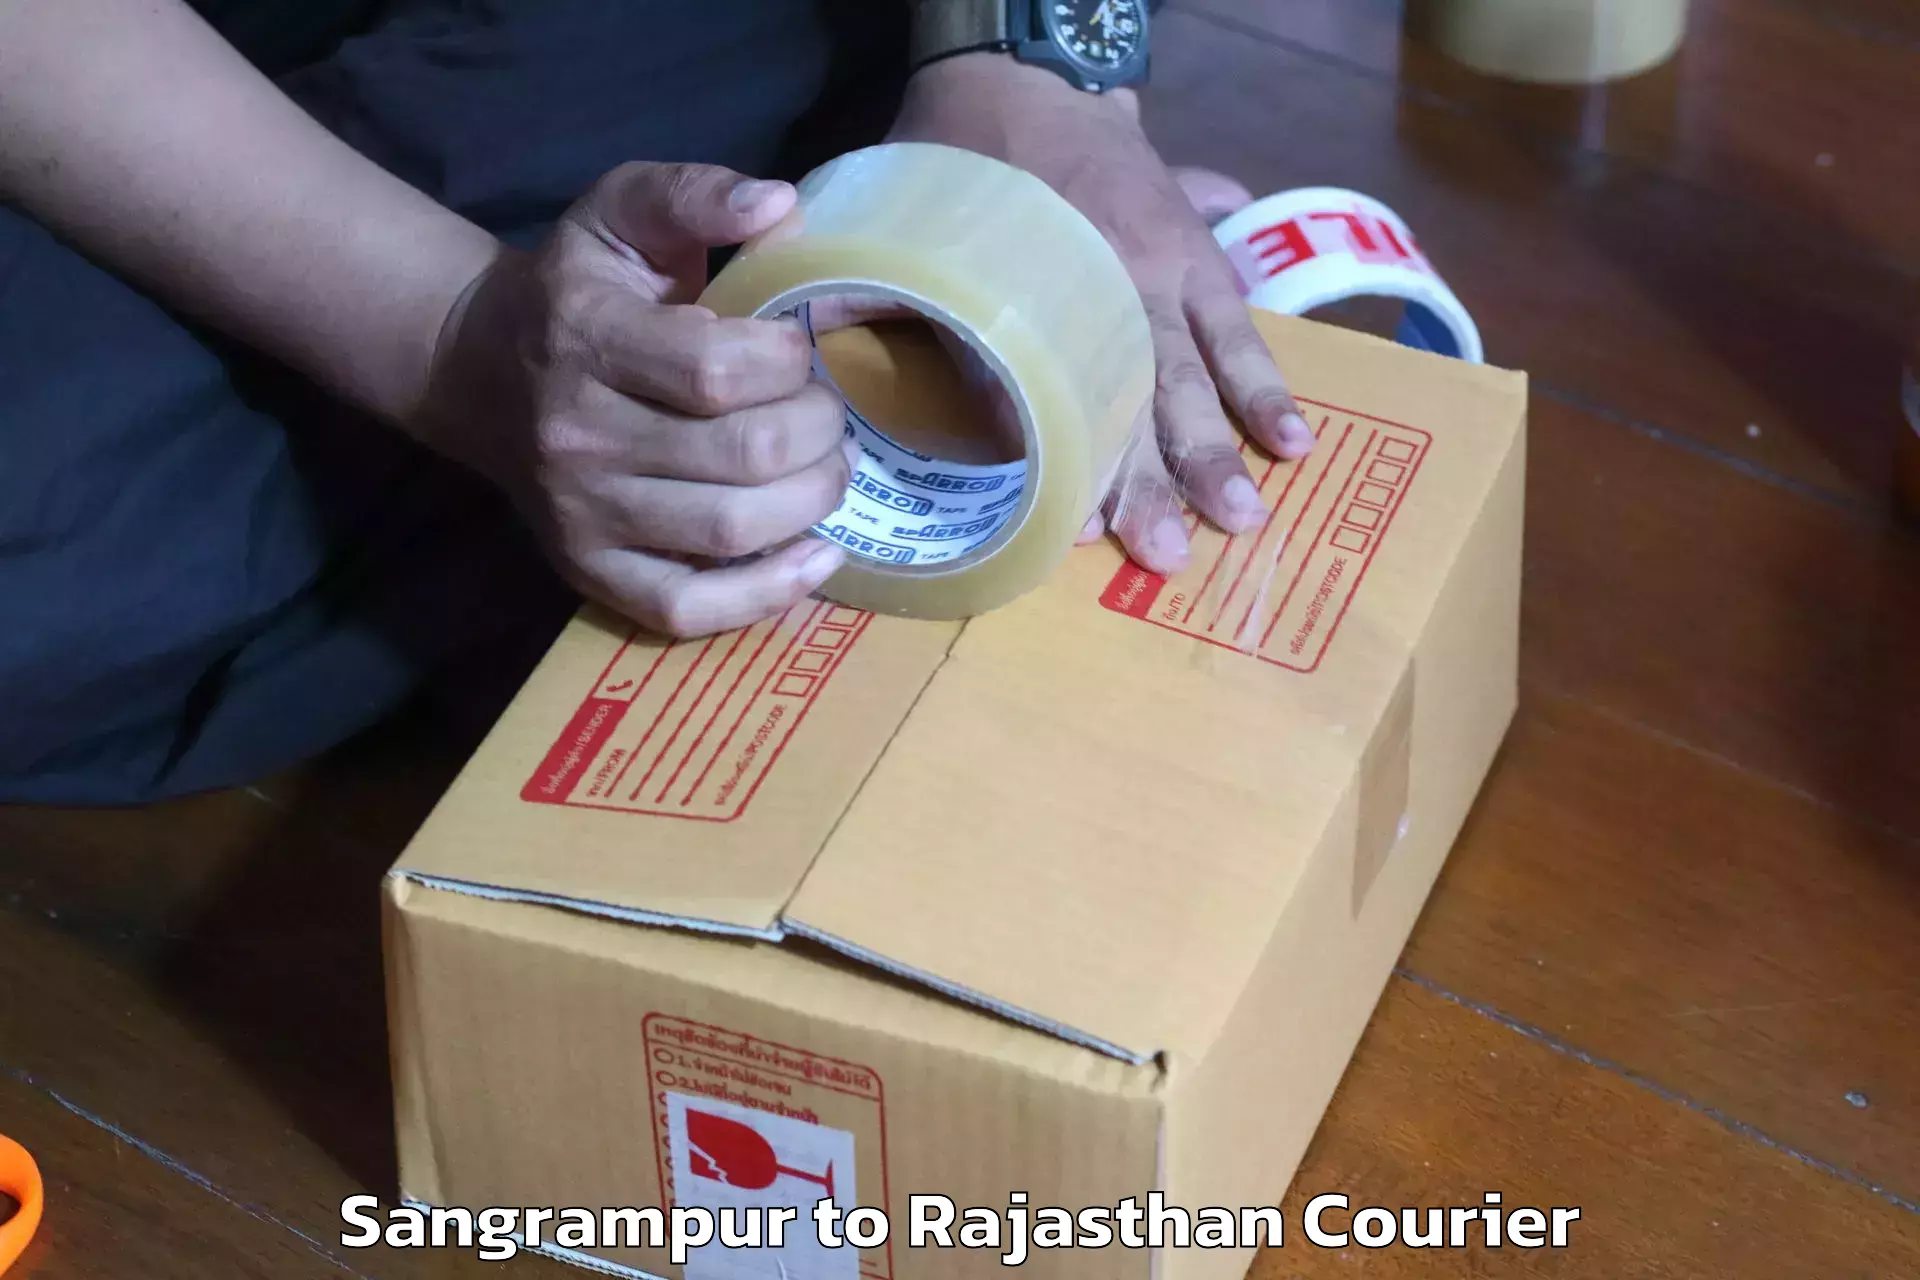 Home goods moving company Sangrampur to Udaipur